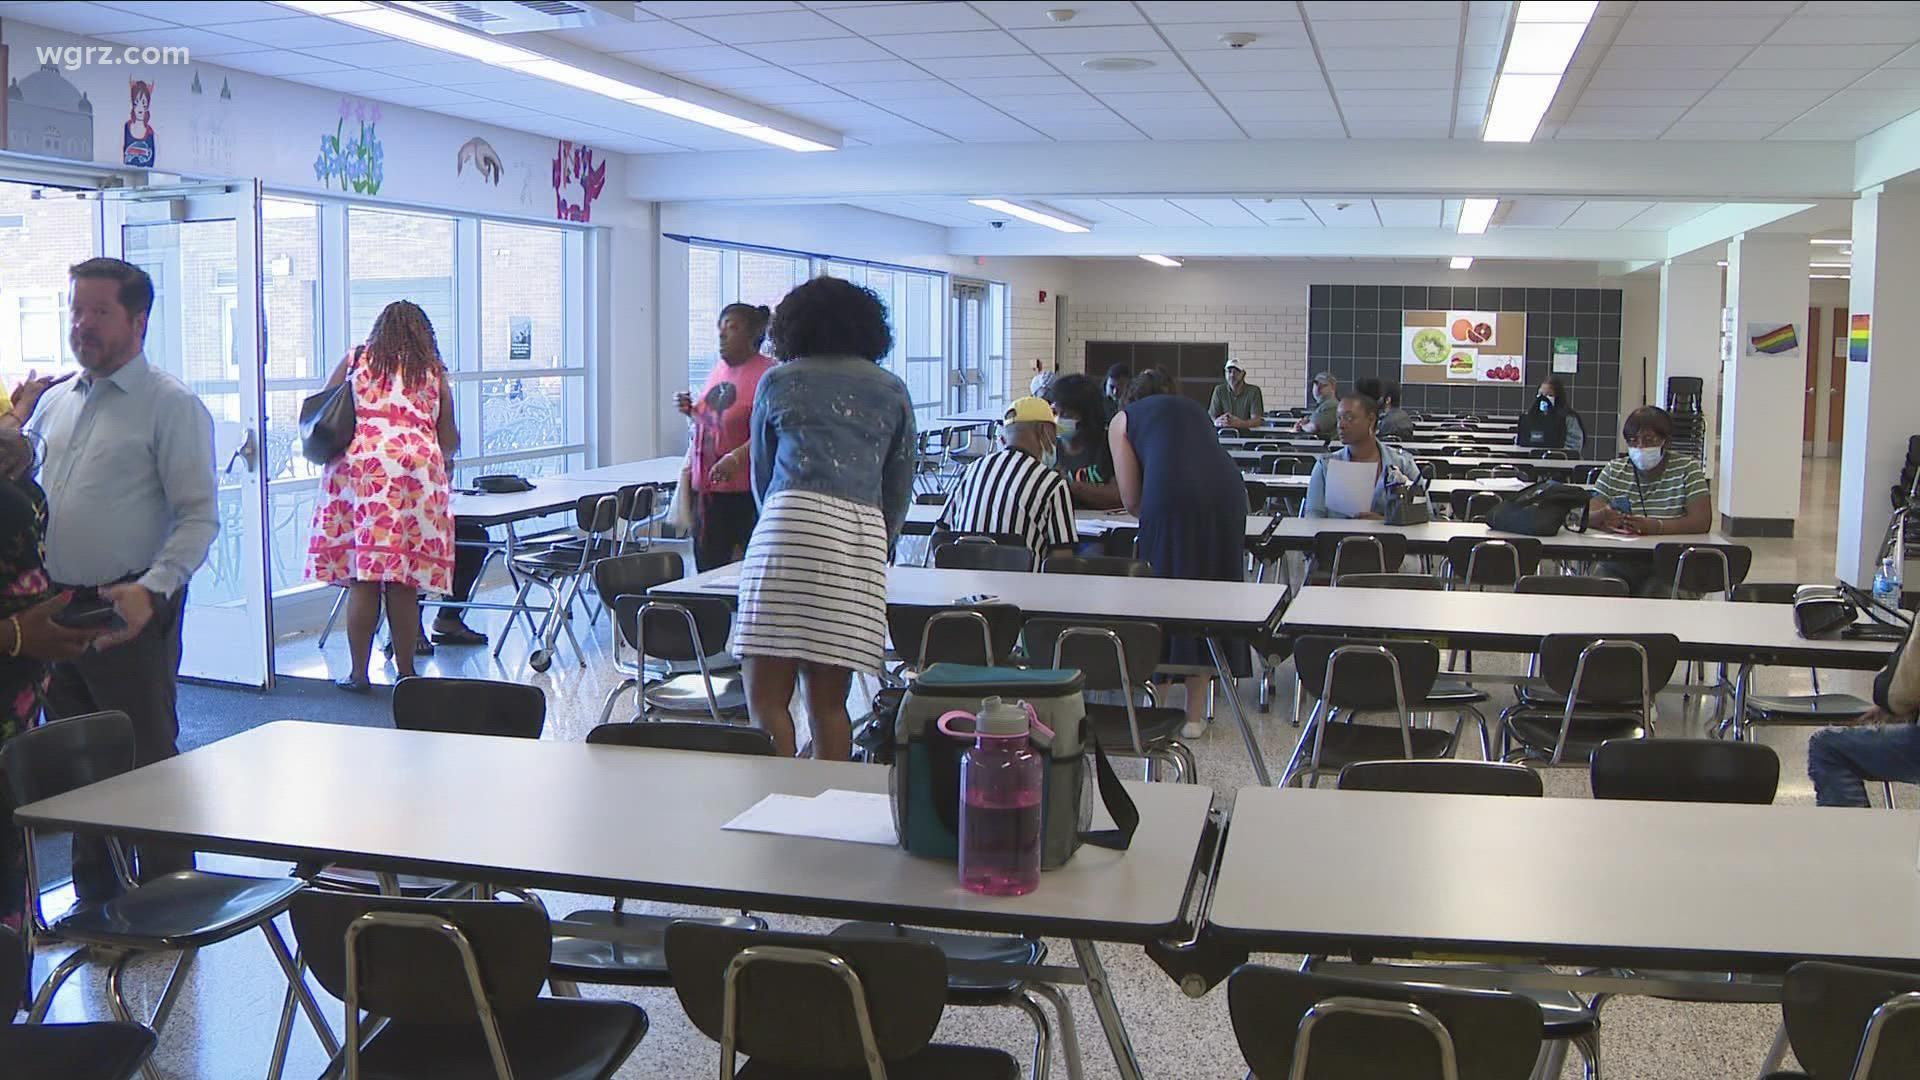 Buffalo public schools held an event today in hopes of hiring more bus aides. Open interviews were conducted at the Academy for Visual and Performing Arts.